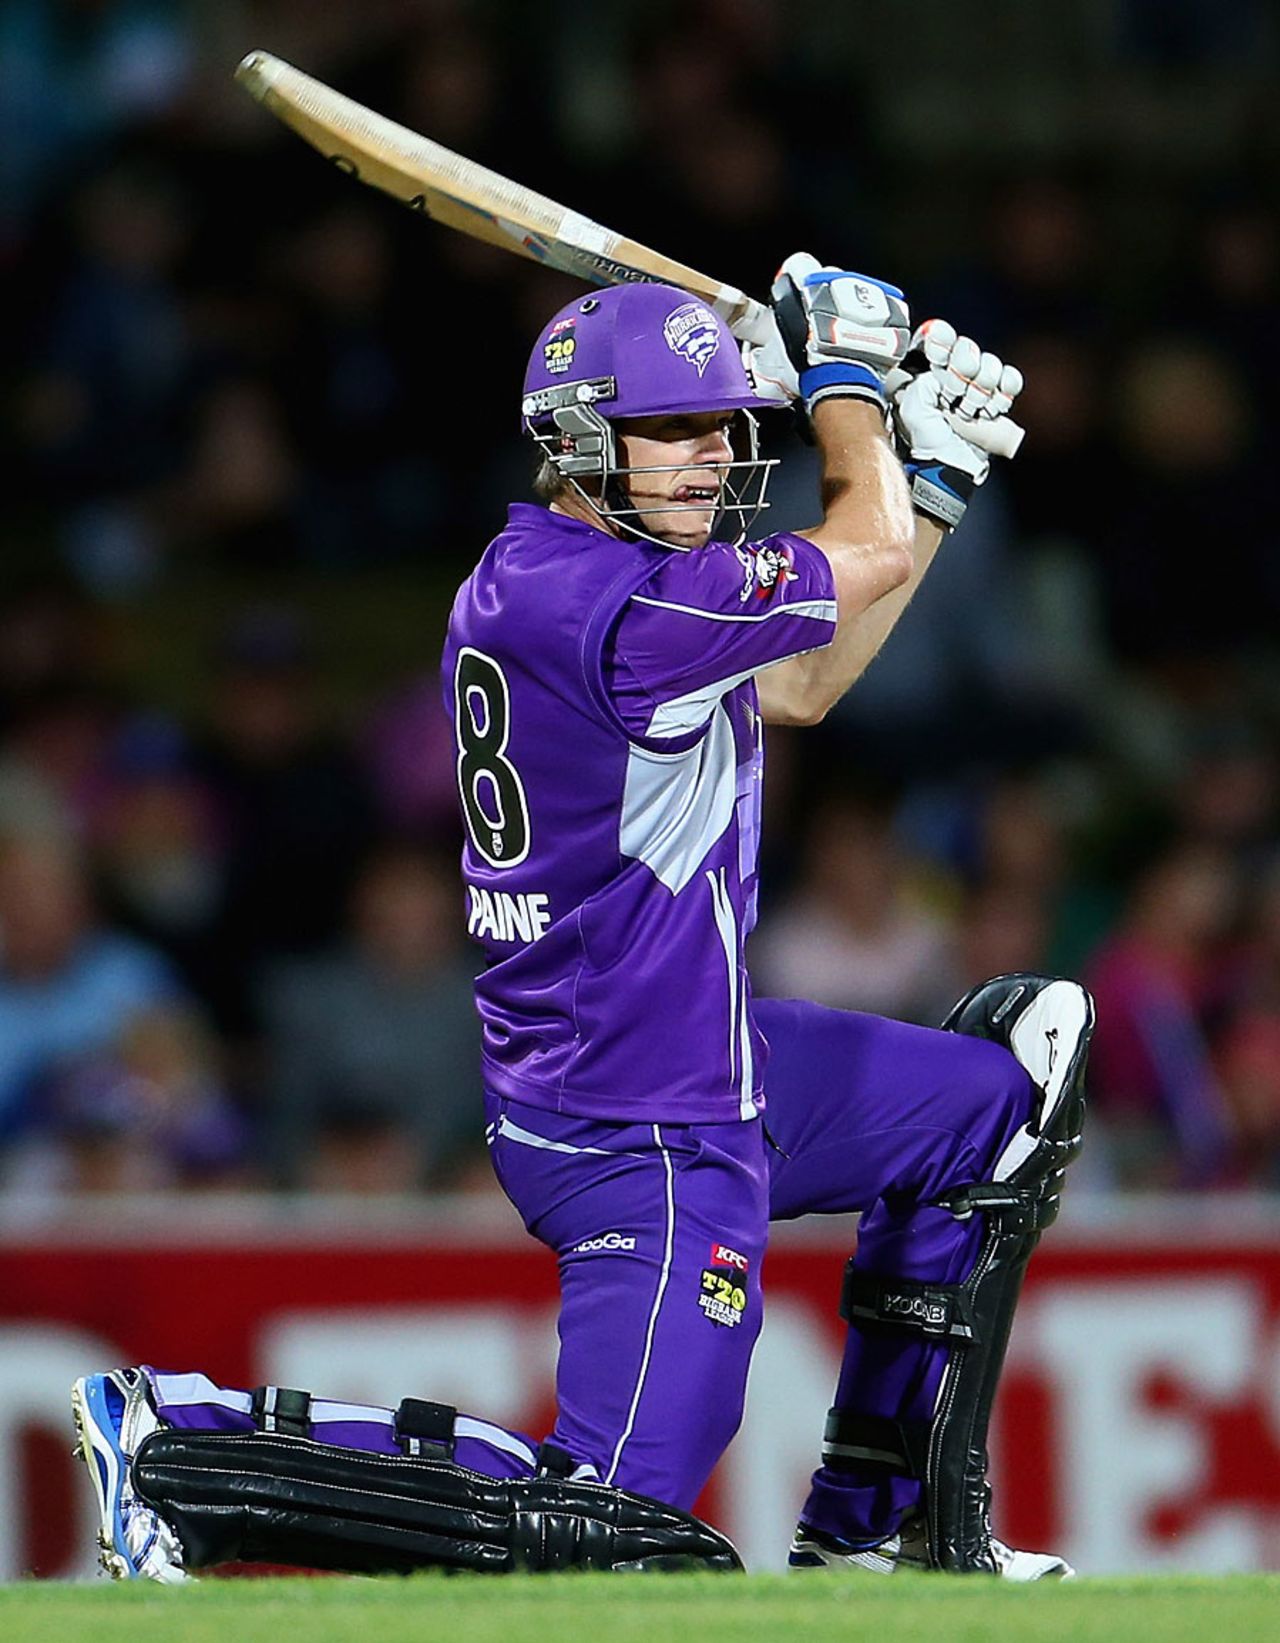 Tim Paine drives through the off side, Hobart Hurricanes v Perth Scorchers, BBL, Hobart, January 1, 2013